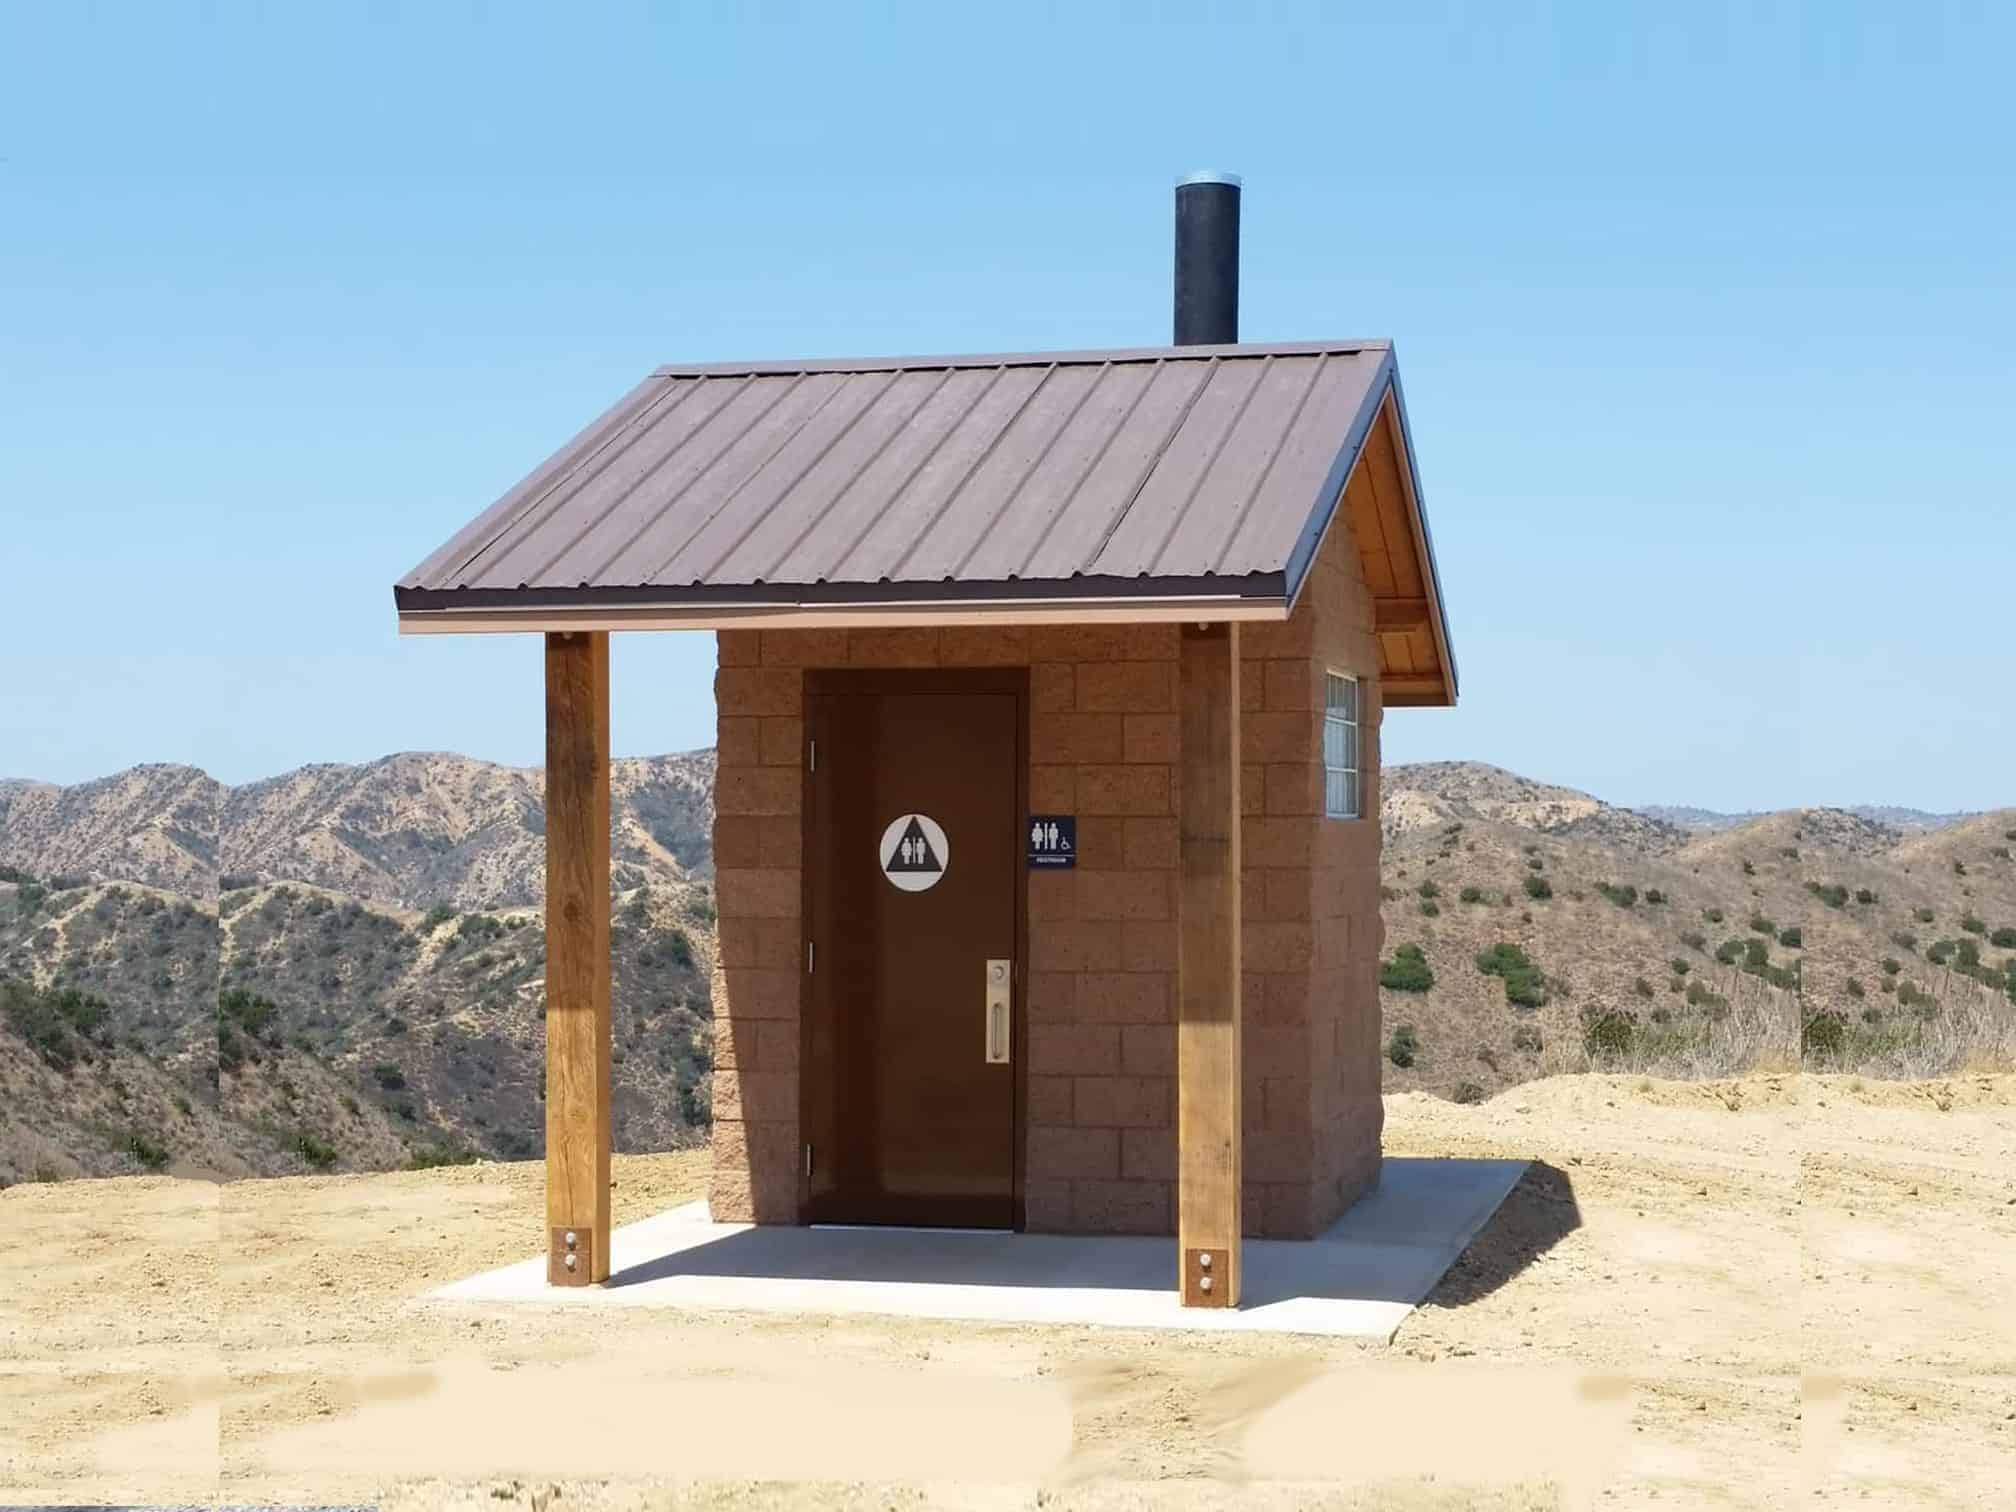 Single Unisex Restroom Building with Covered Entrance